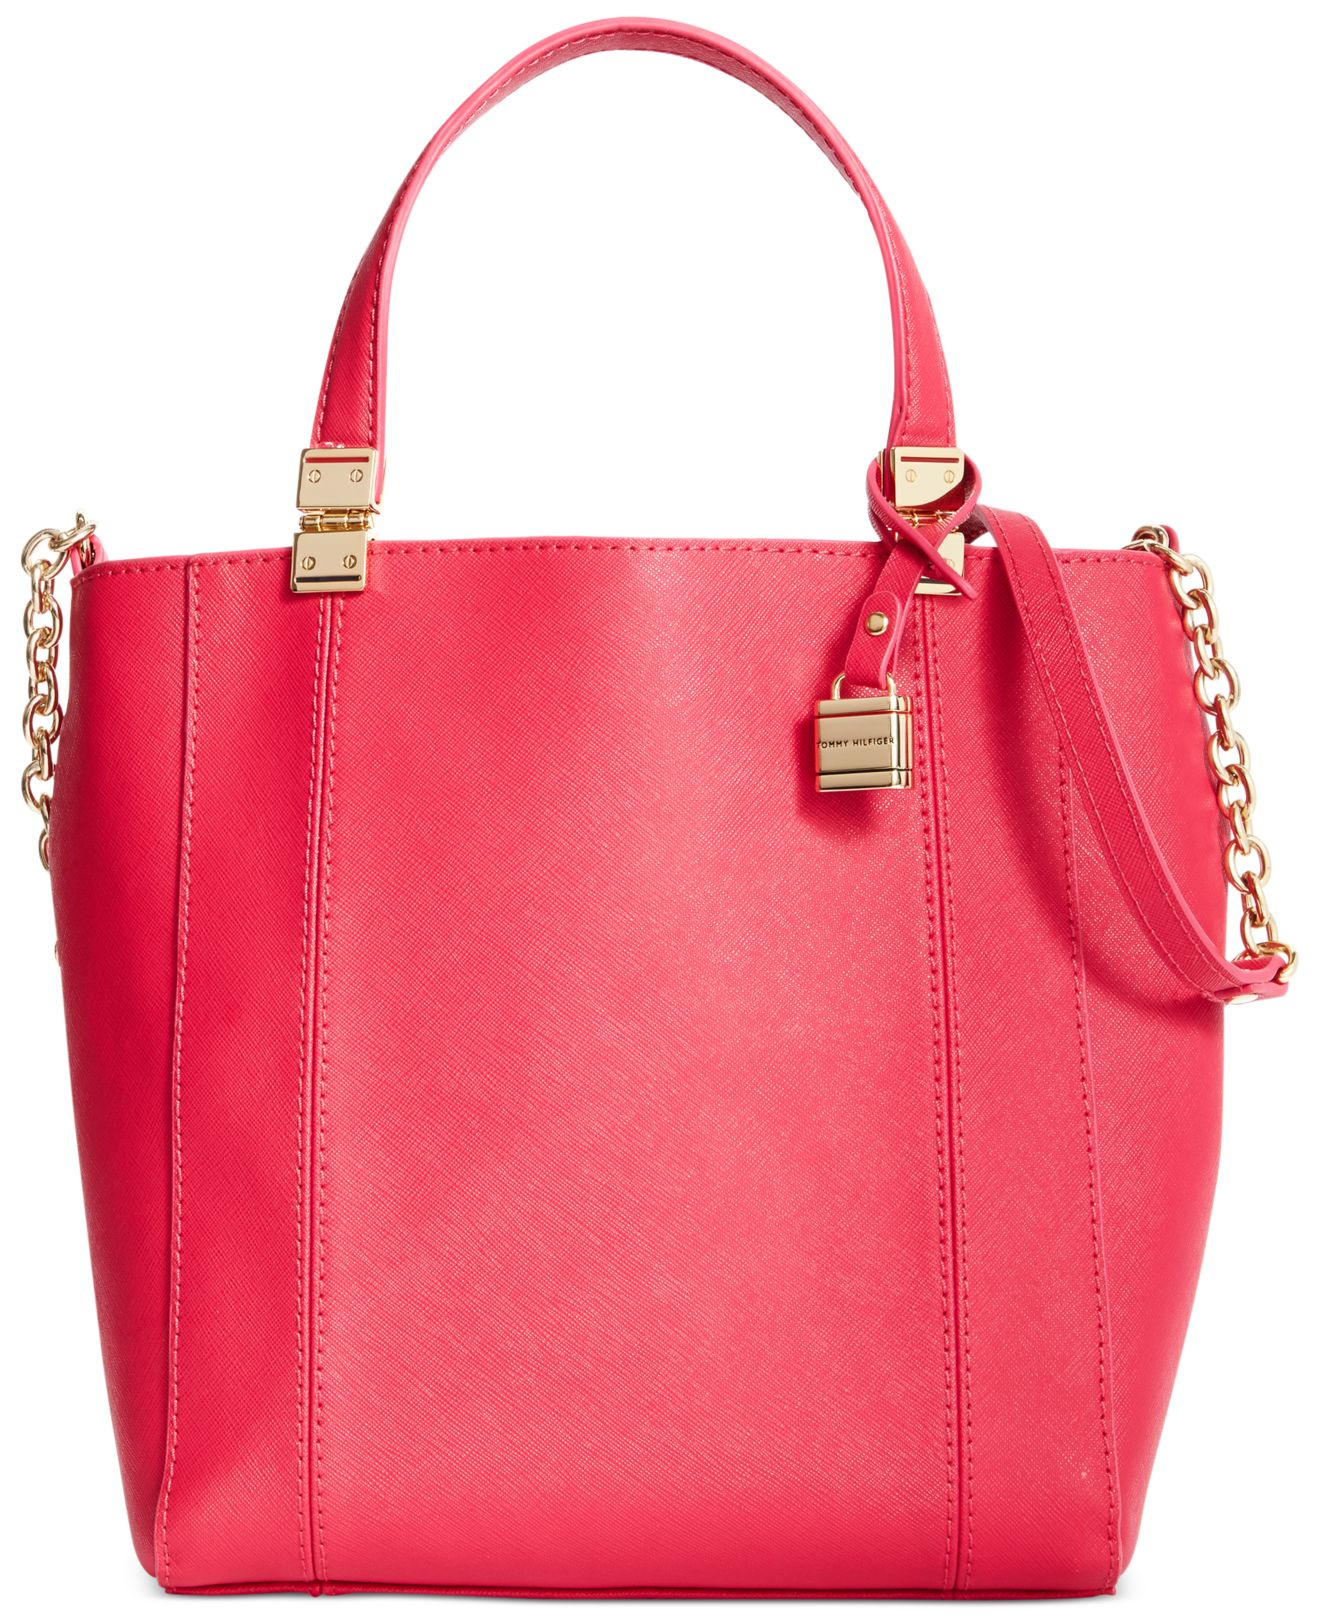 Lyst - Tommy Hilfiger Th Hinge Saffiano Convertible Small N/S Tote in Pink